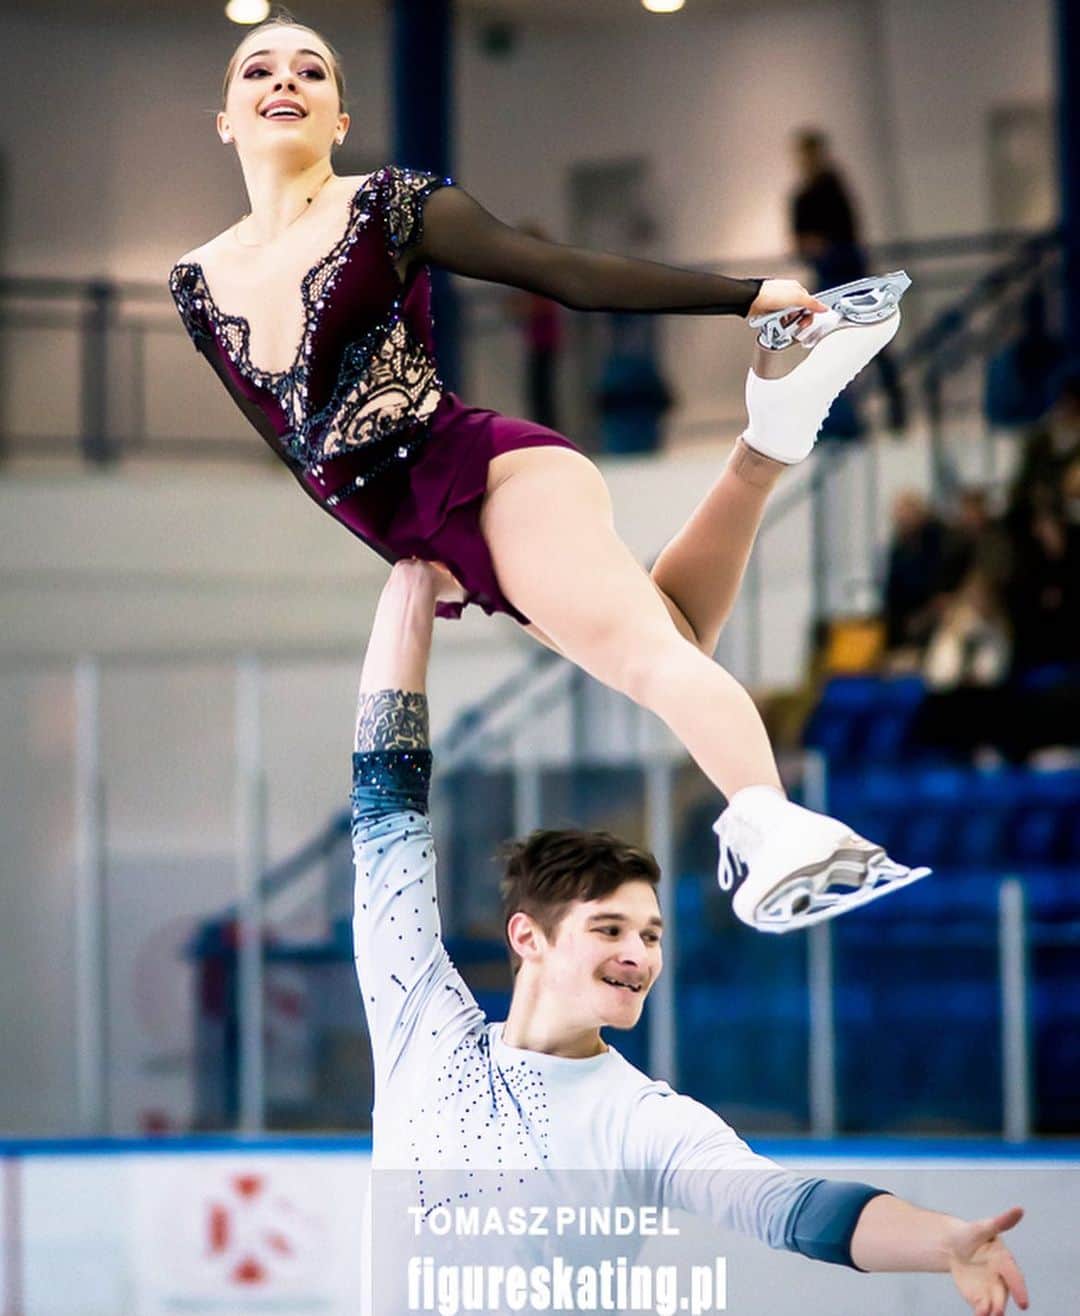 Justine Brasseurのインスタグラム：「I am very sad to announce that unfortunately Mark and I are no longer forming a team. Some situations made our paths go into different directions. We went through many obstacles, but I am very proud of what we accomplished, especially our third place in Poland. I know that our partnership could have went much further, but I know that this was an amazing learning experience and I’m sure that great things will be coming. I would like to thank everyone that was supporting us along and that is still supporting me and I wish you, Mark, good luck for everything!! I am now looking for a new partner to start a new adventure and I am really excited to see what the future holds for me. Besides this news, I hope you guys are all staying safe and healthy. Everything will be okay❤️. Merci à tous pour votre support, j’ai hâte d’être de retour sur la glace et surtout j’ai hâte de voir ce qui m’attend ❤️ Prenez soin de vous xxx」